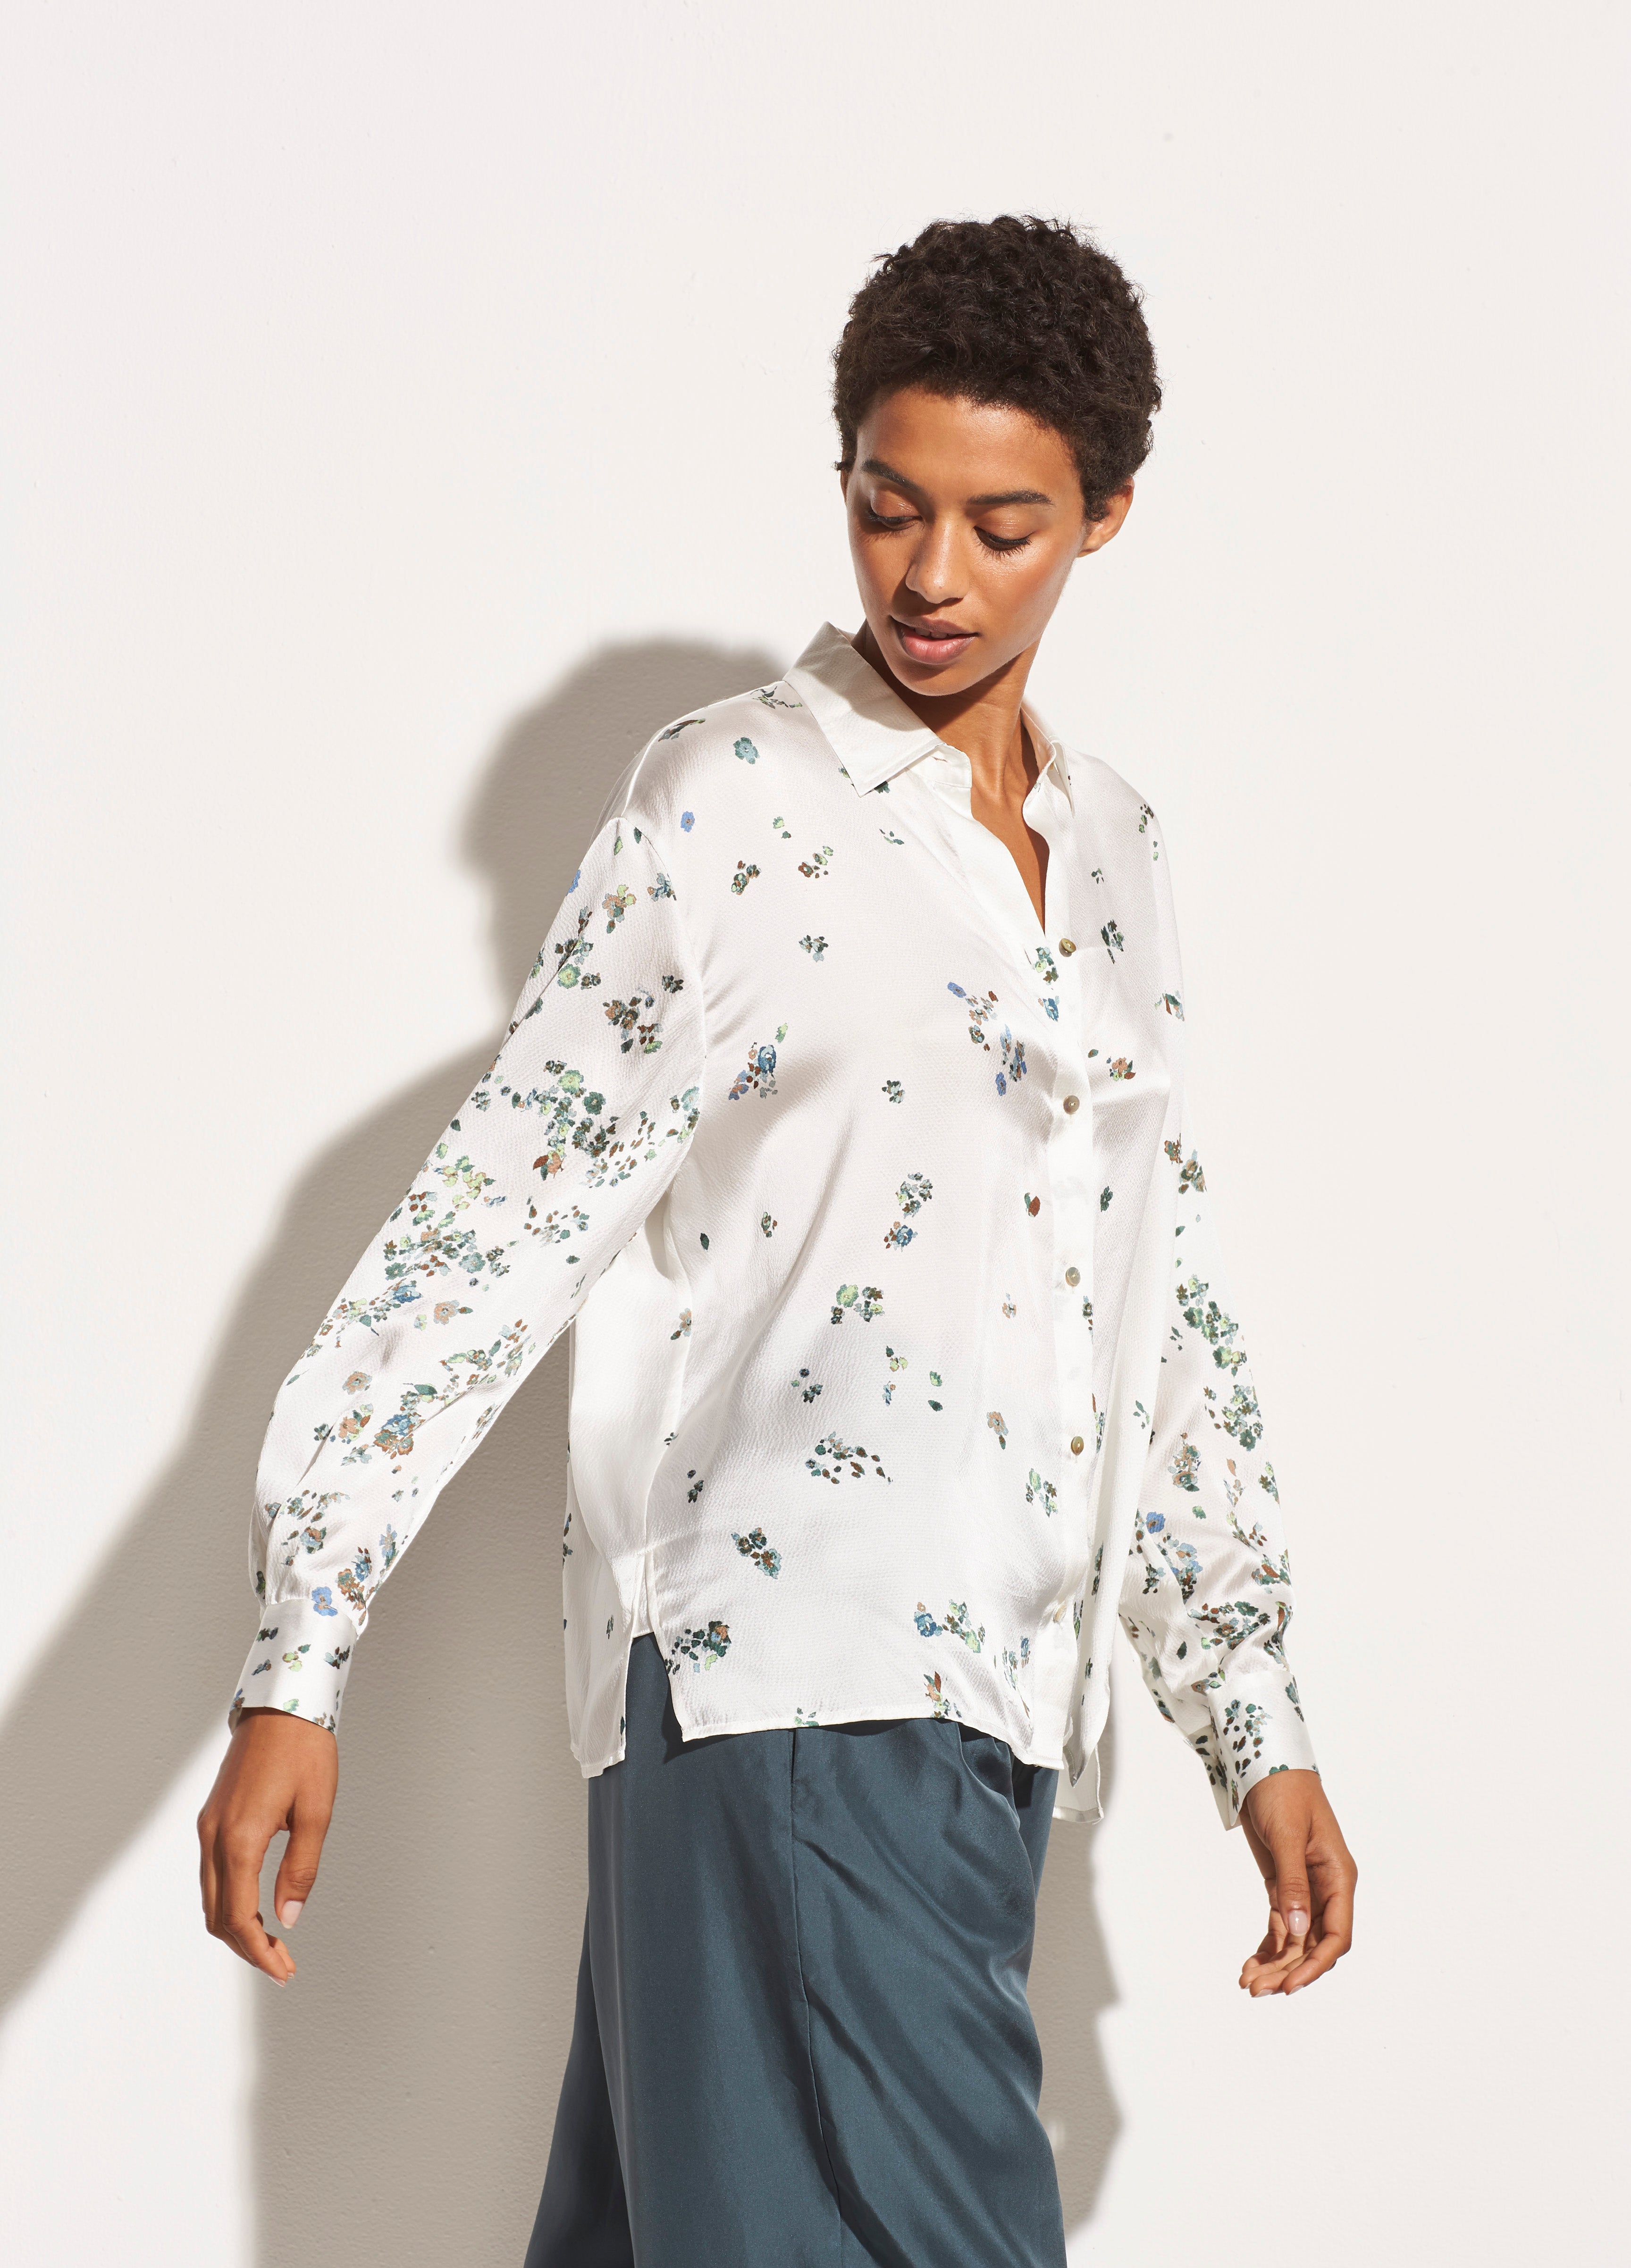 Vince | Scattered Floral Satin Blouse in Optic White | Vince Unfold